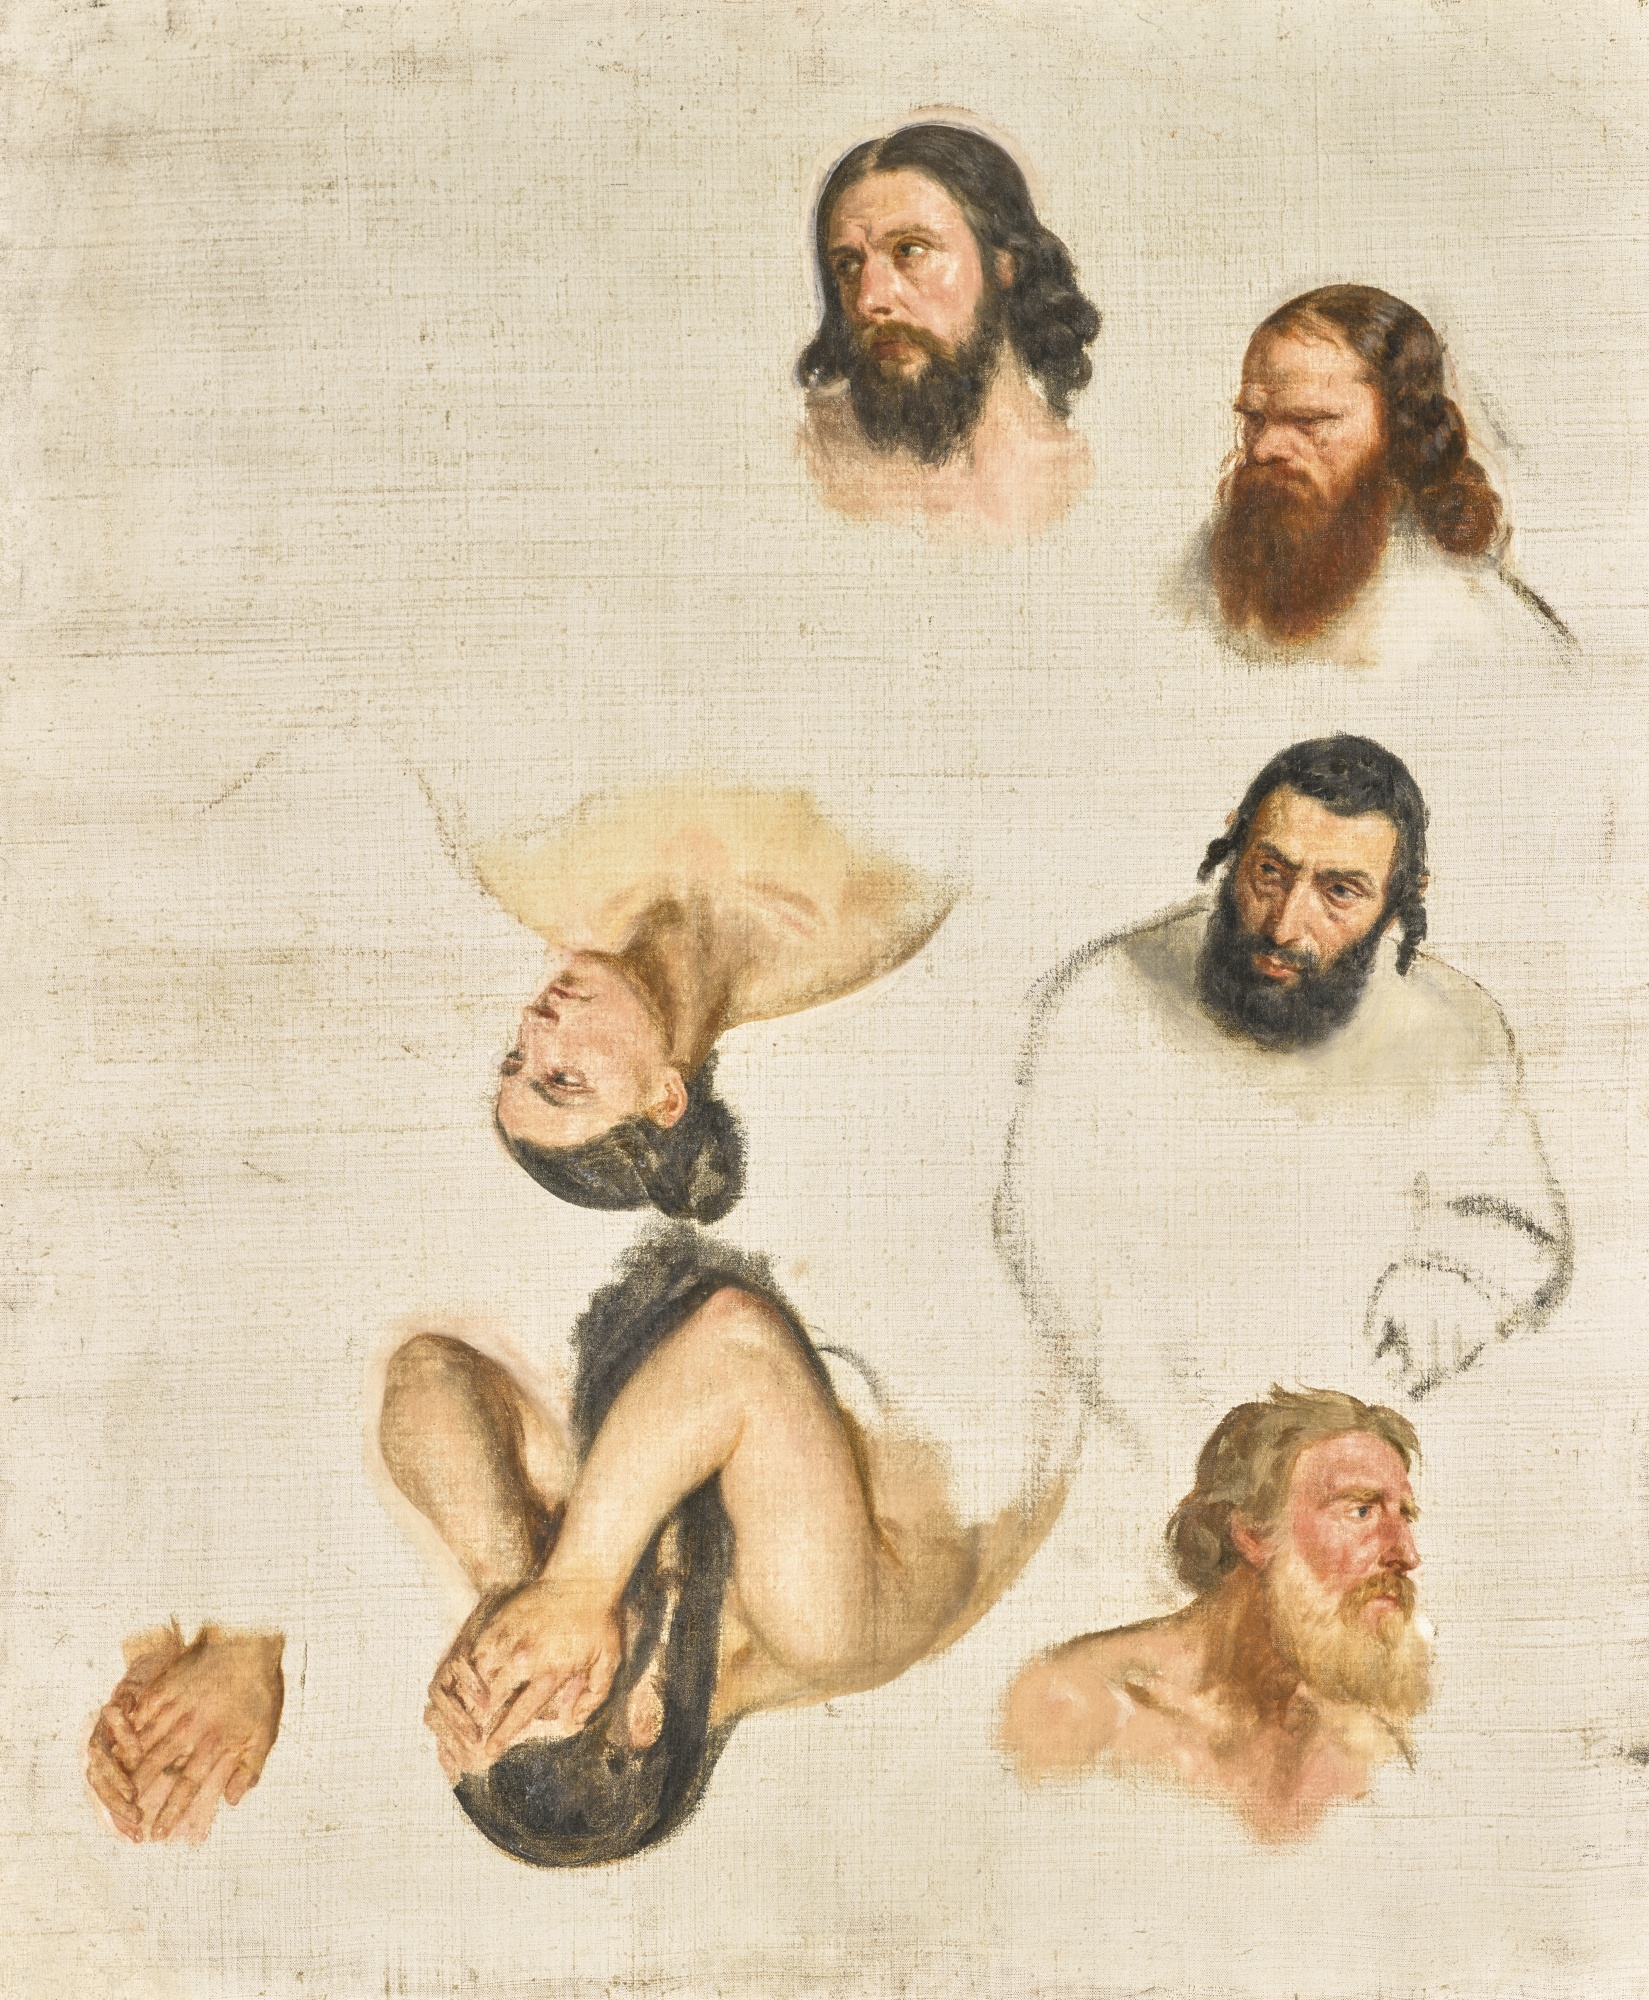 Artwork by Paul Delaroche, 2 WORKS: STUDIES FOR A SEATED MAN, HEADS AND HANDS, Made of Oil on canvas